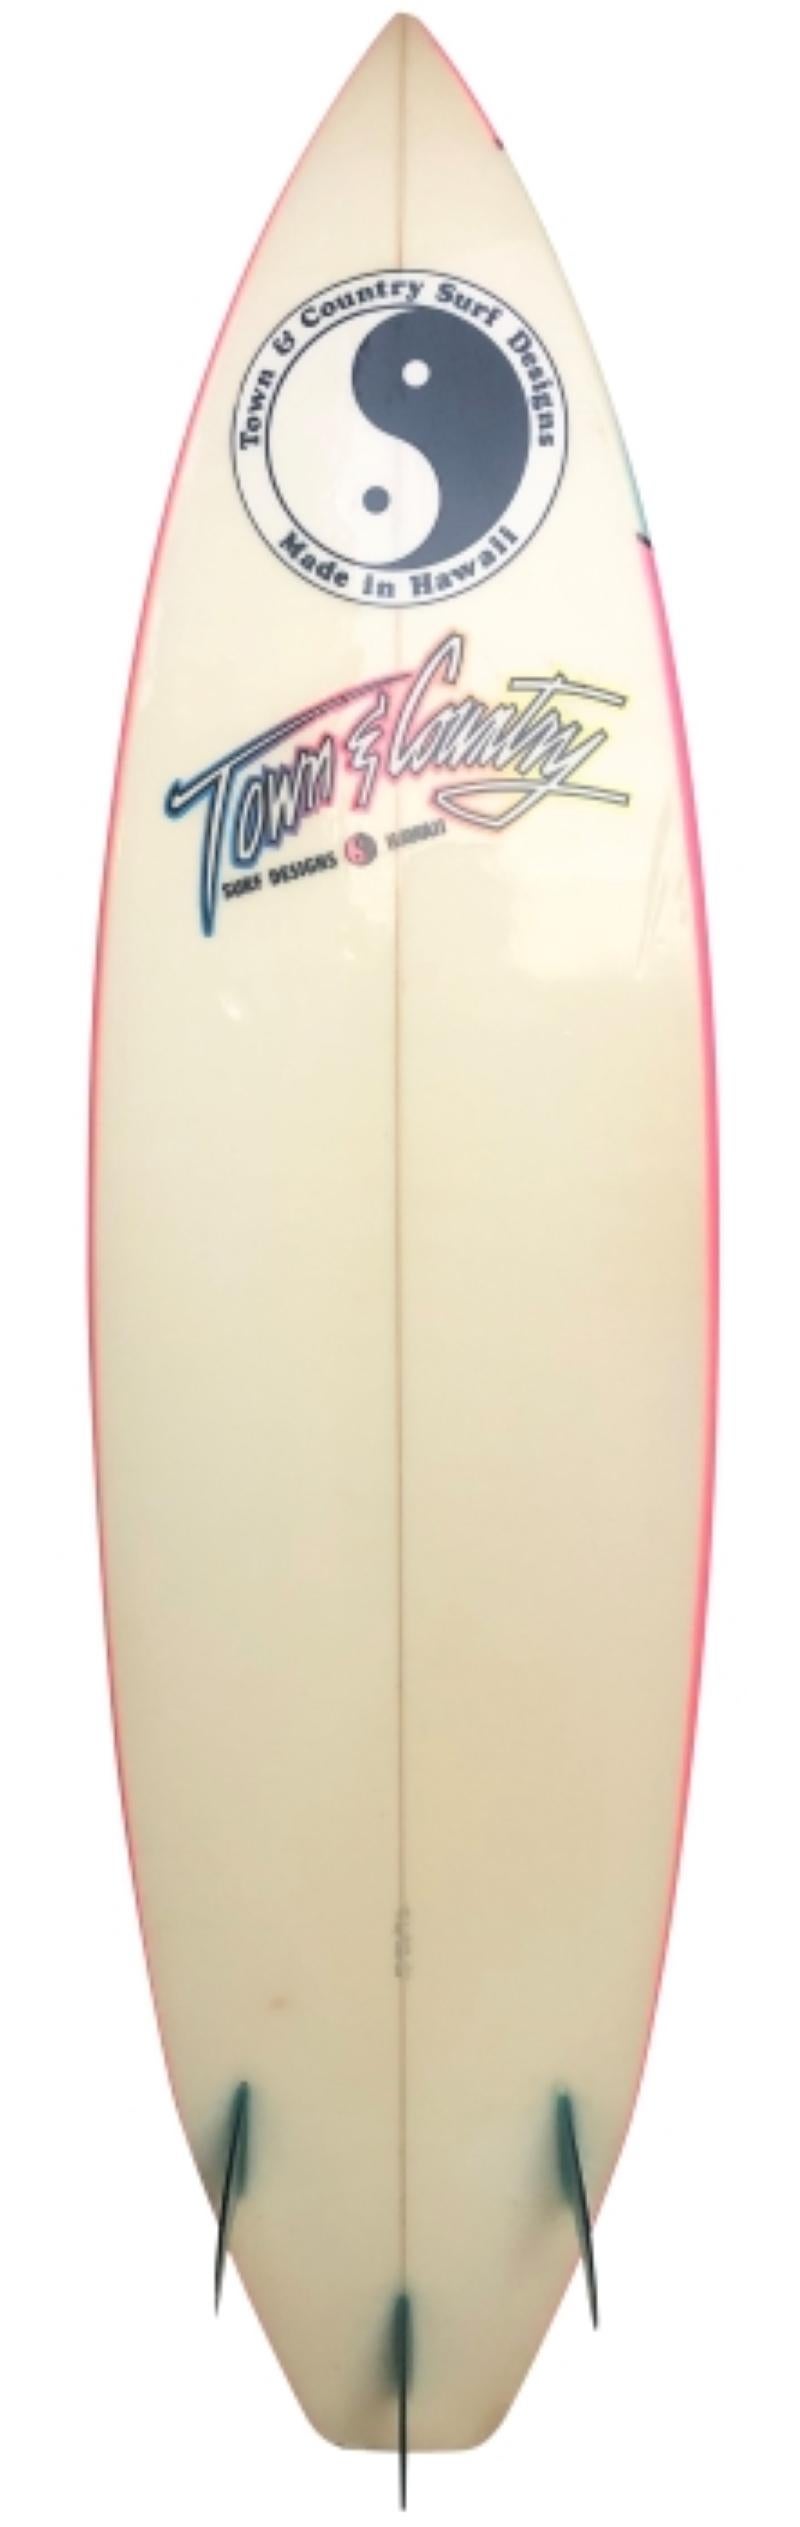 1987 Town & Country shortboard shaped by Mike Casey. Features a stunning neon pink airbrush design complete with beautiful aqua blue thruster (tri-fin) setup. A remarkable example of a 1980s shortboard in all original condition.